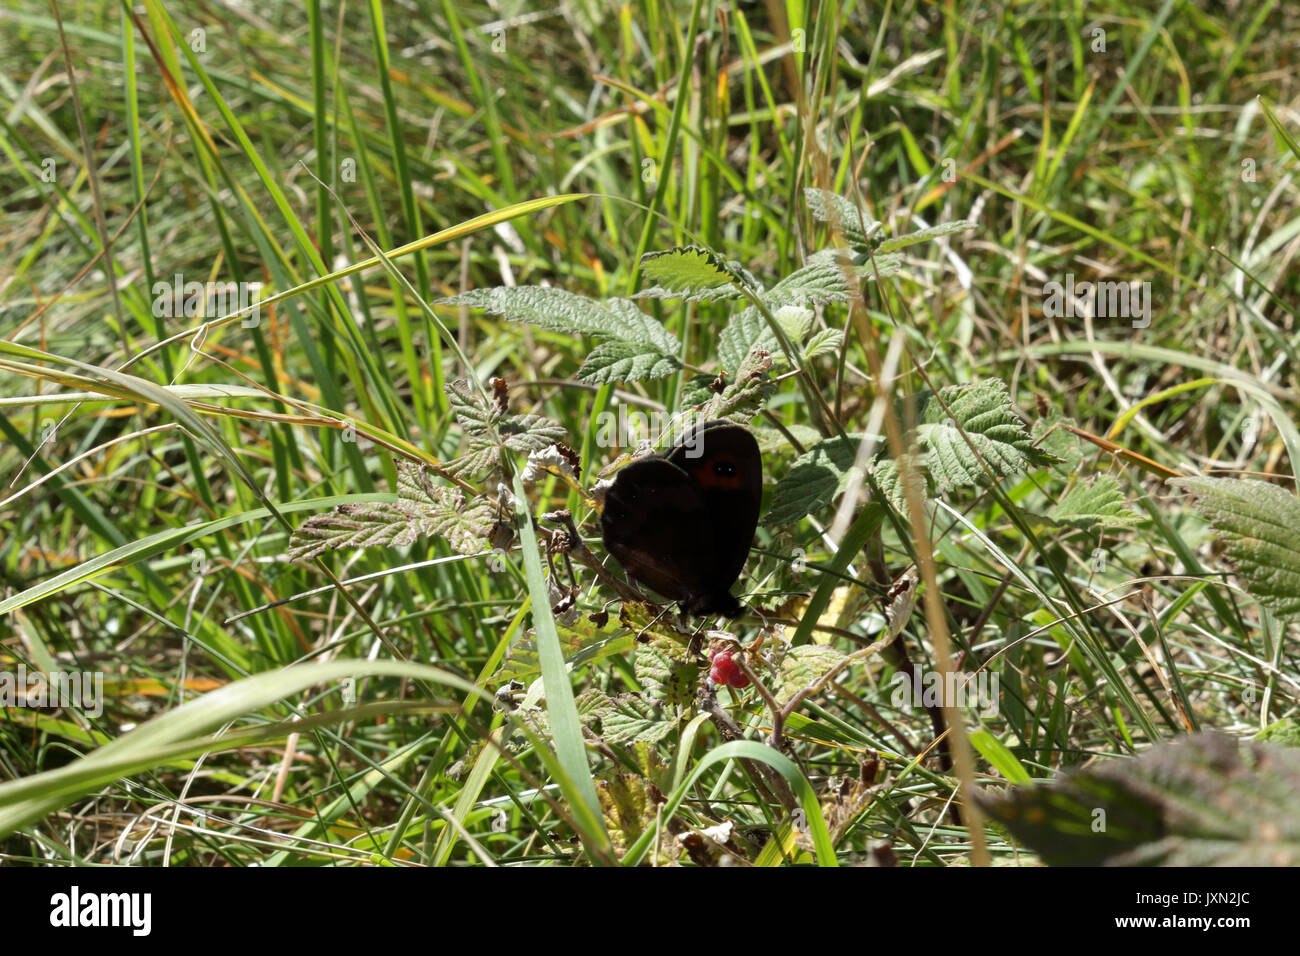 A dark brown butterfly perched on the grass of a lawn Stock Photo